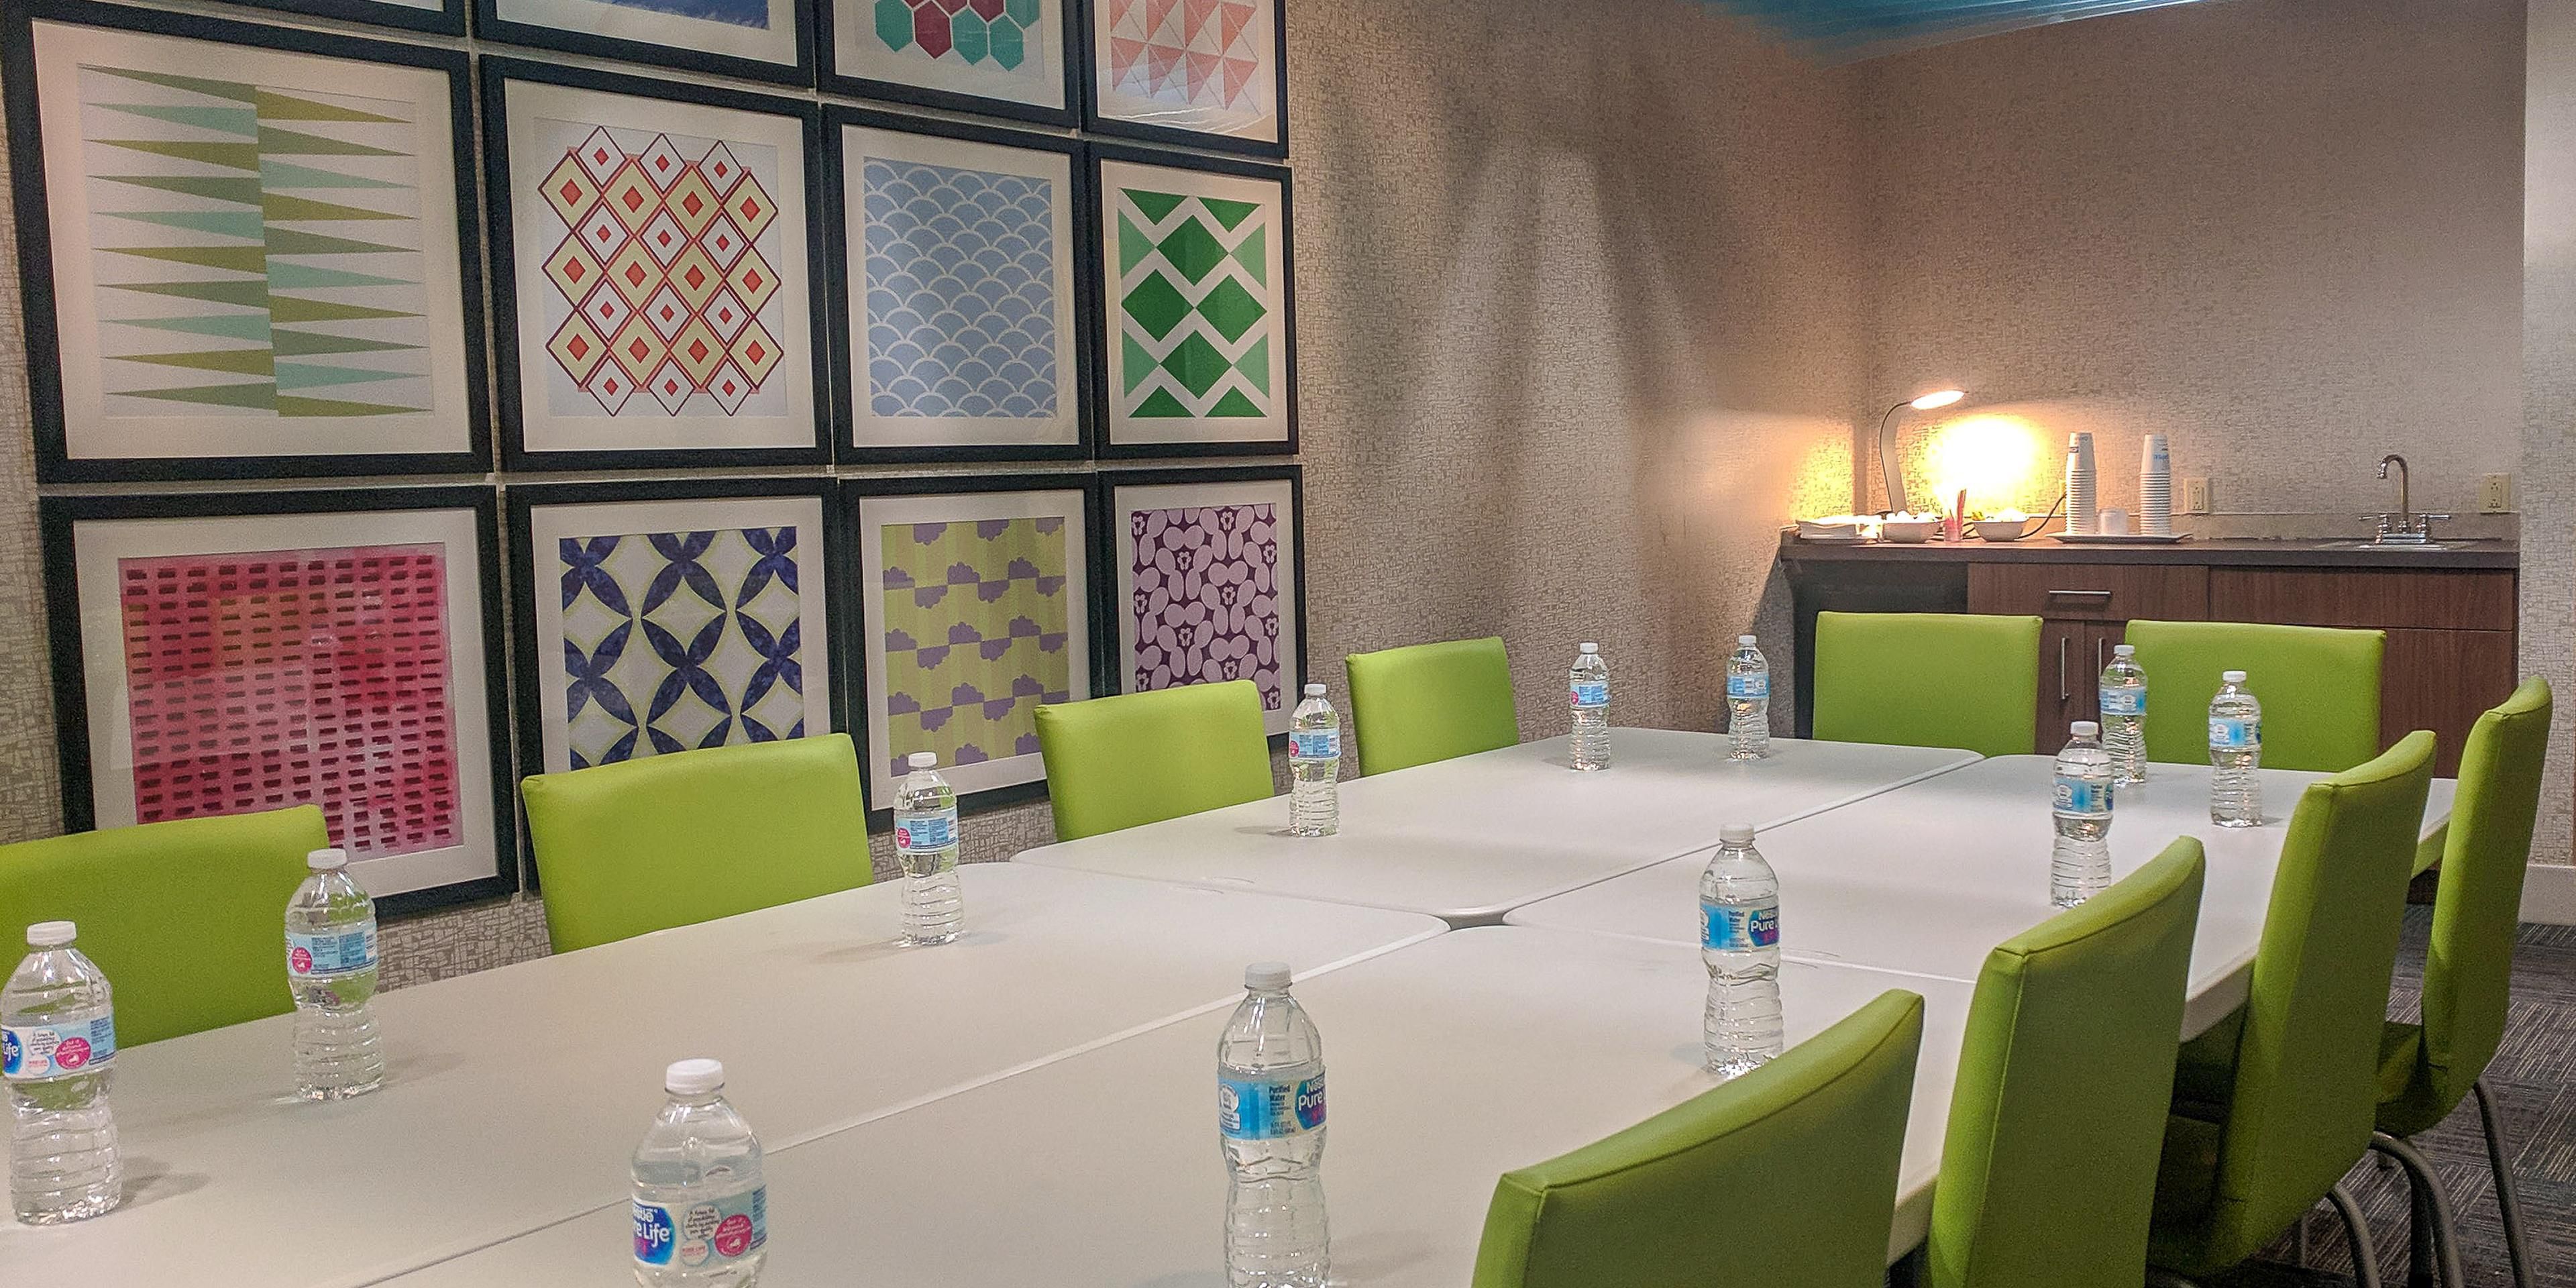 Contact the Holiday Inn Express Fort Wayne East (New Haven) for all of your small meeting needs!  Let us take care of the details so you can be productive.